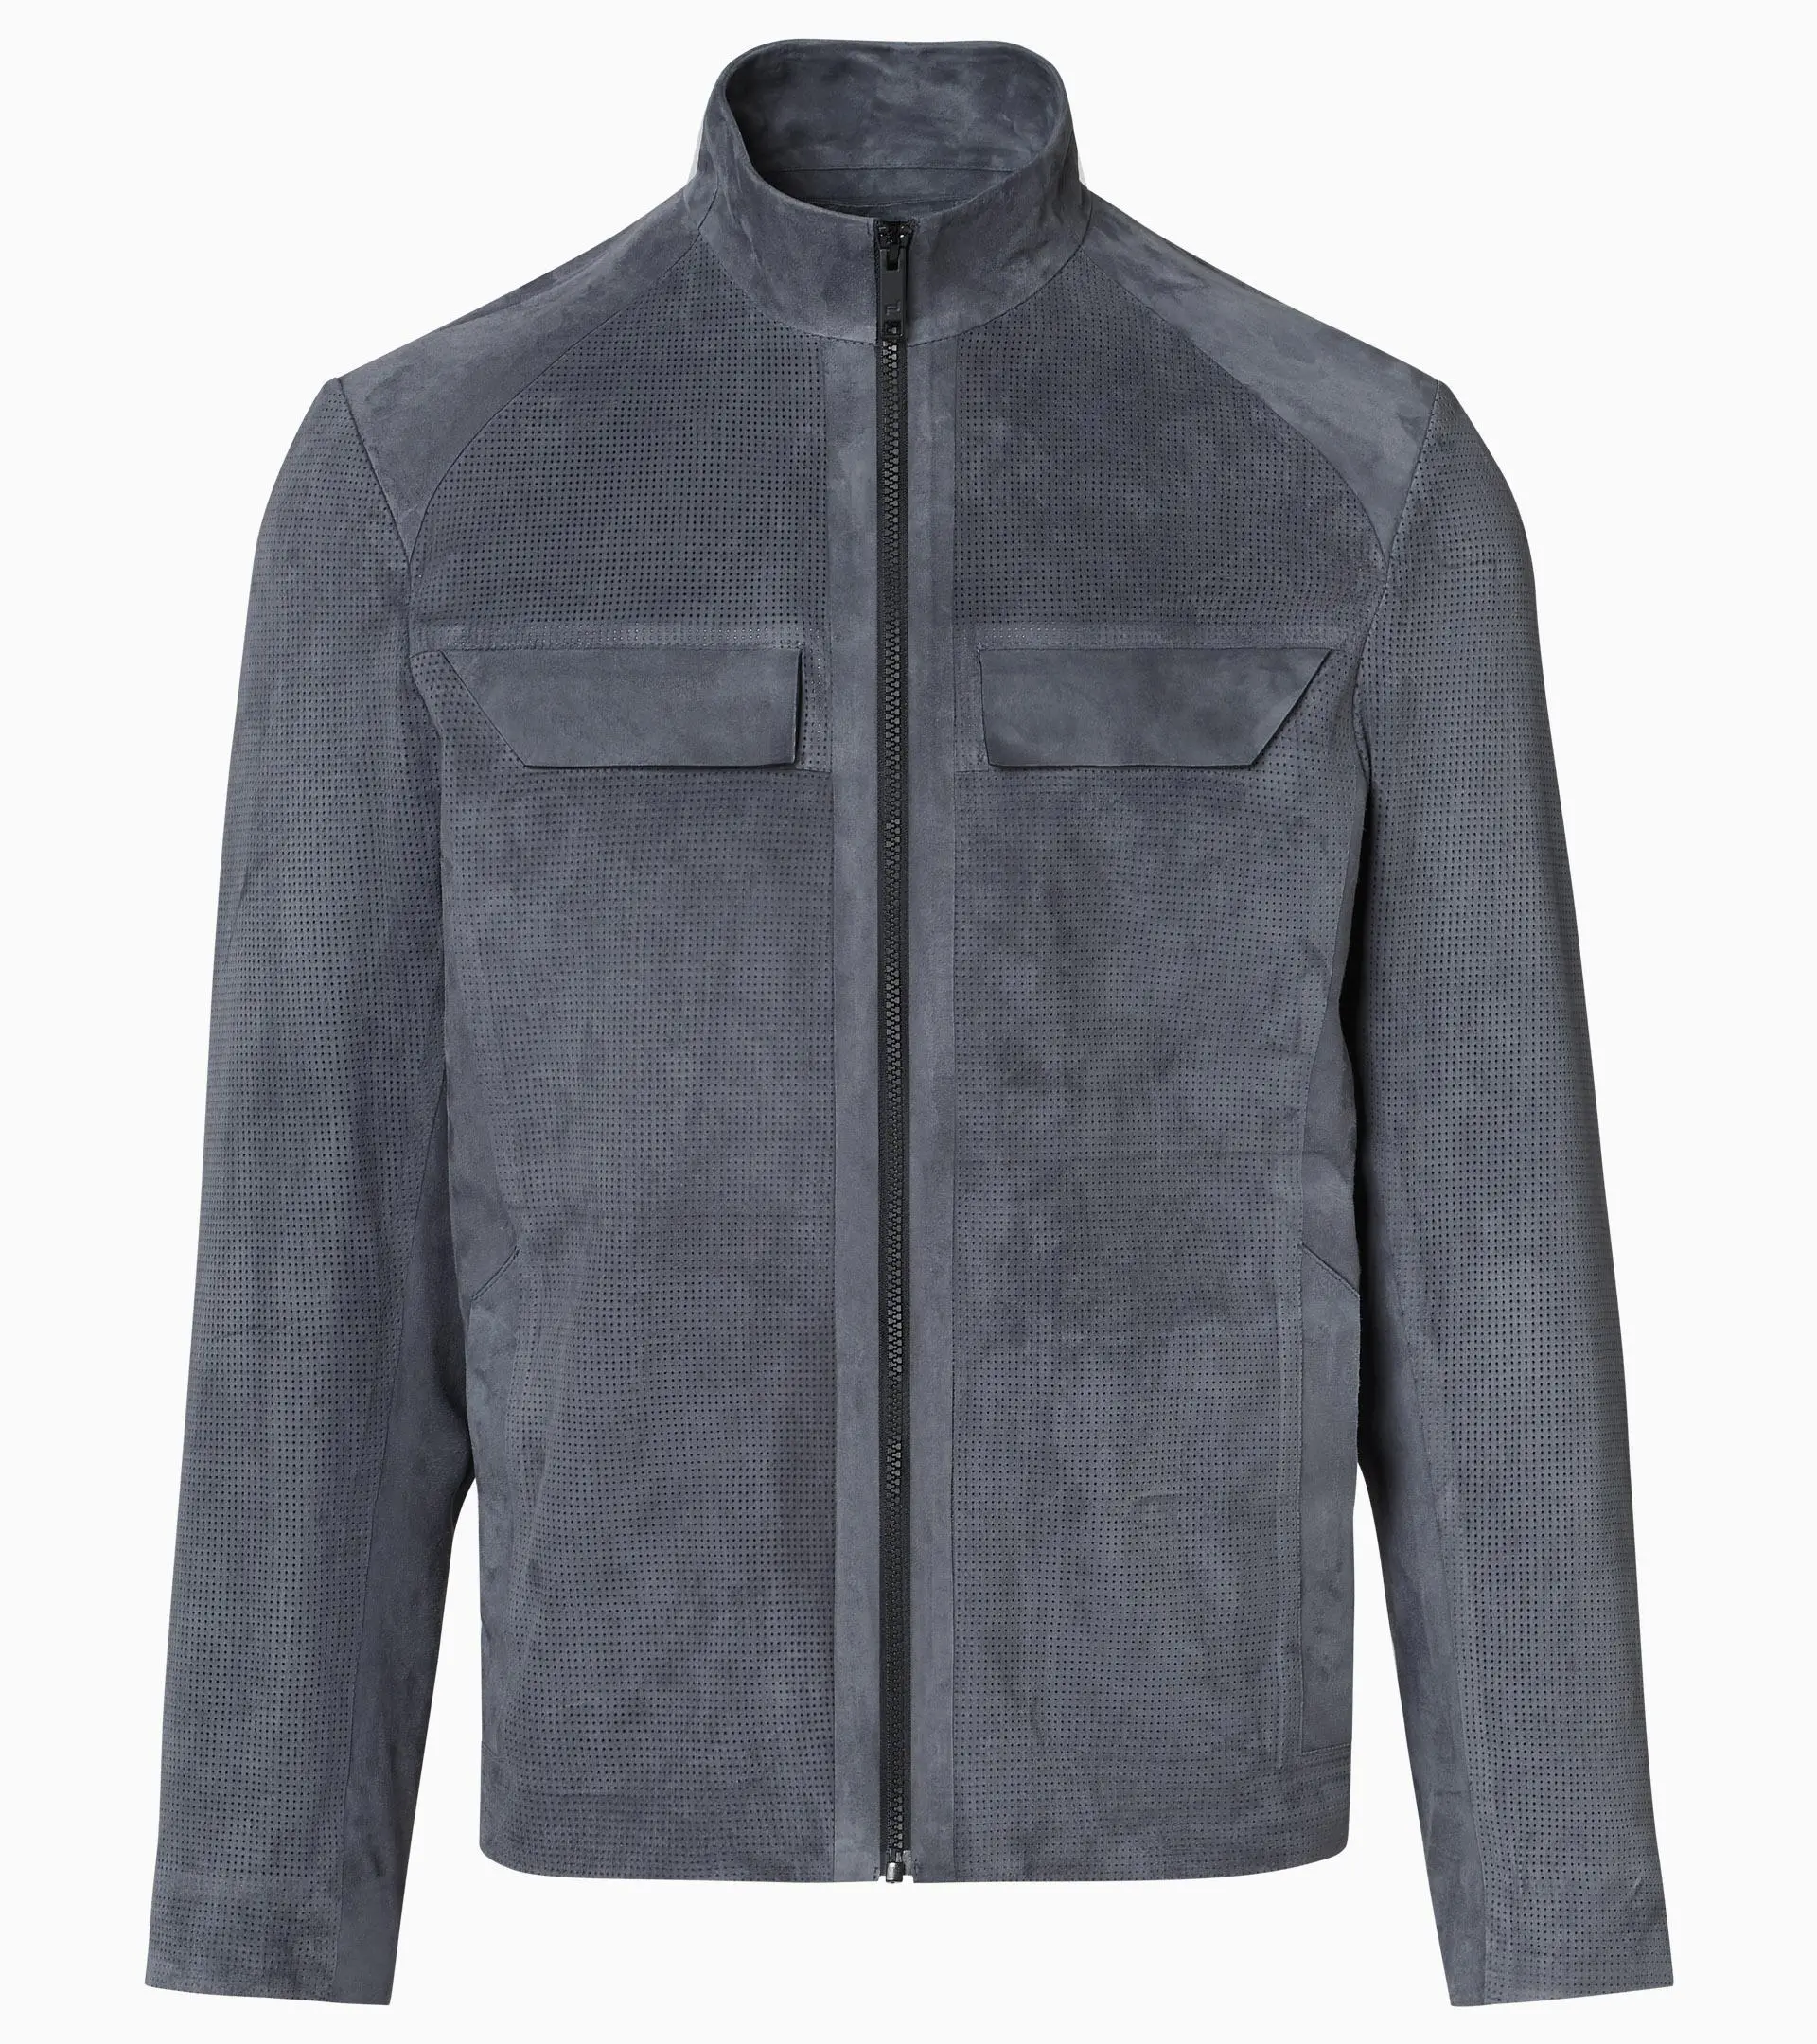 Perforated Goat Suede Leather Jacket | PORSCHE SHOP